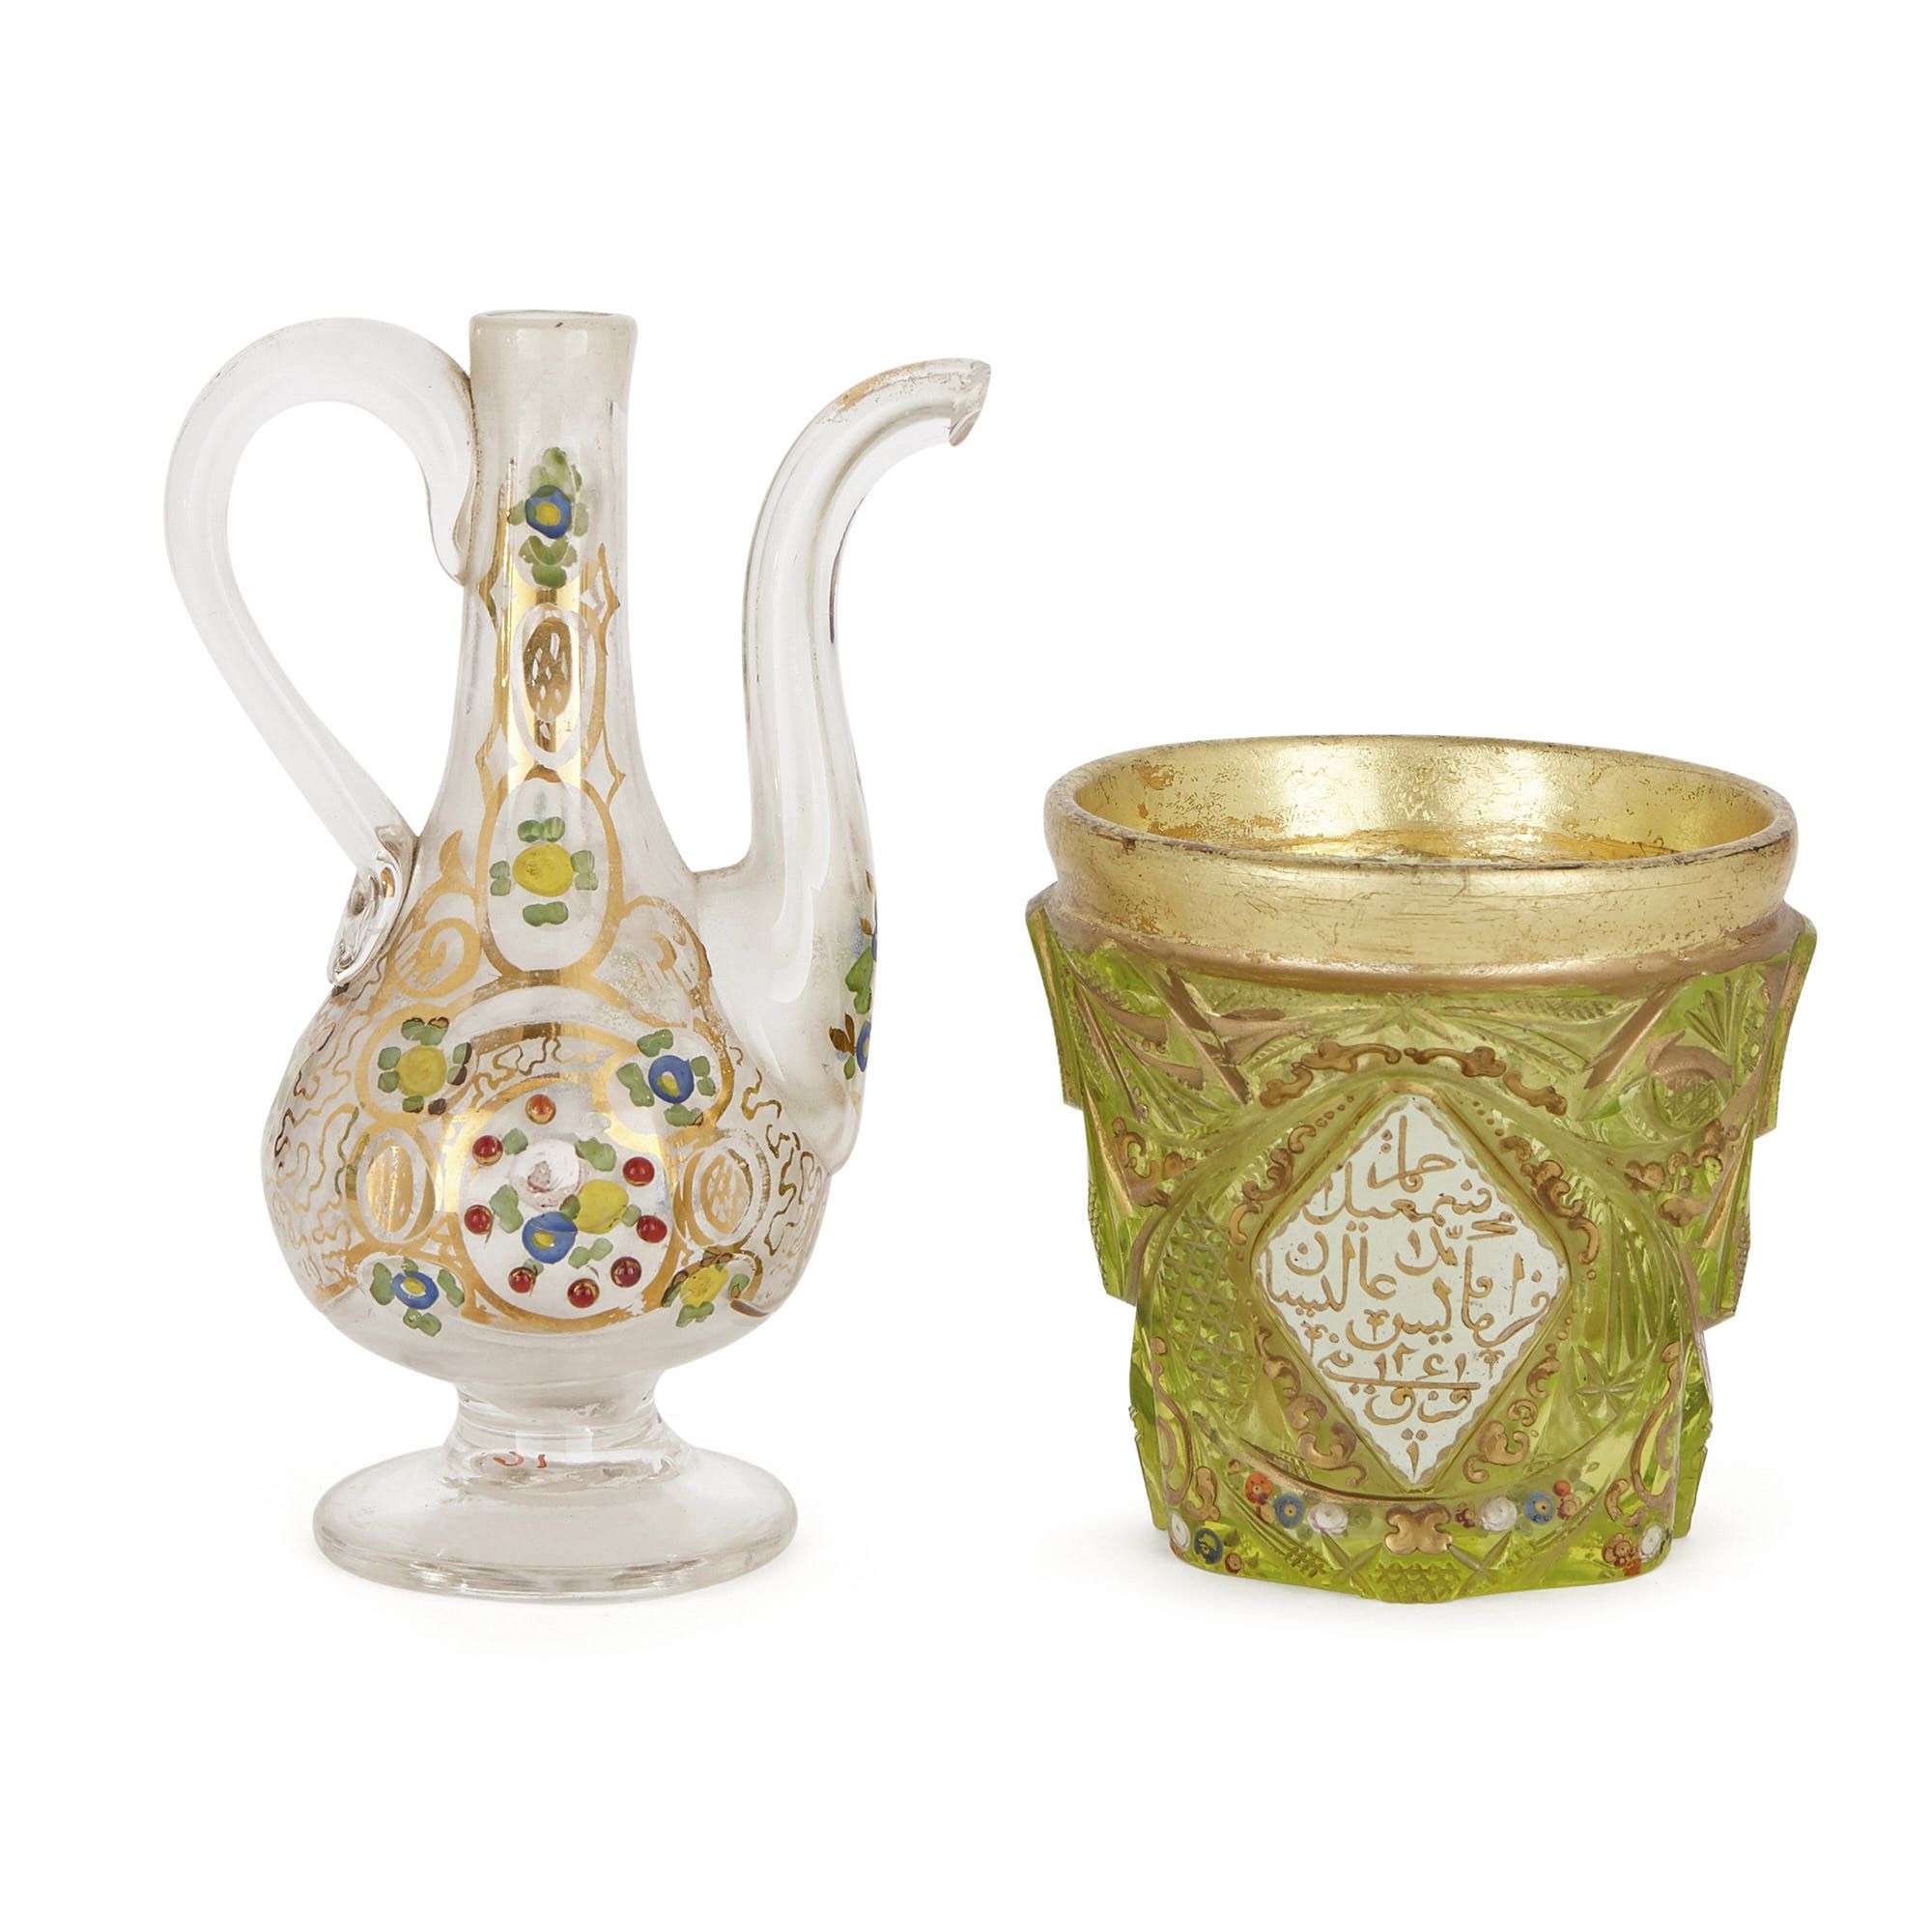 Collection of antique Bohemian glass objects | Mayfair Gallery